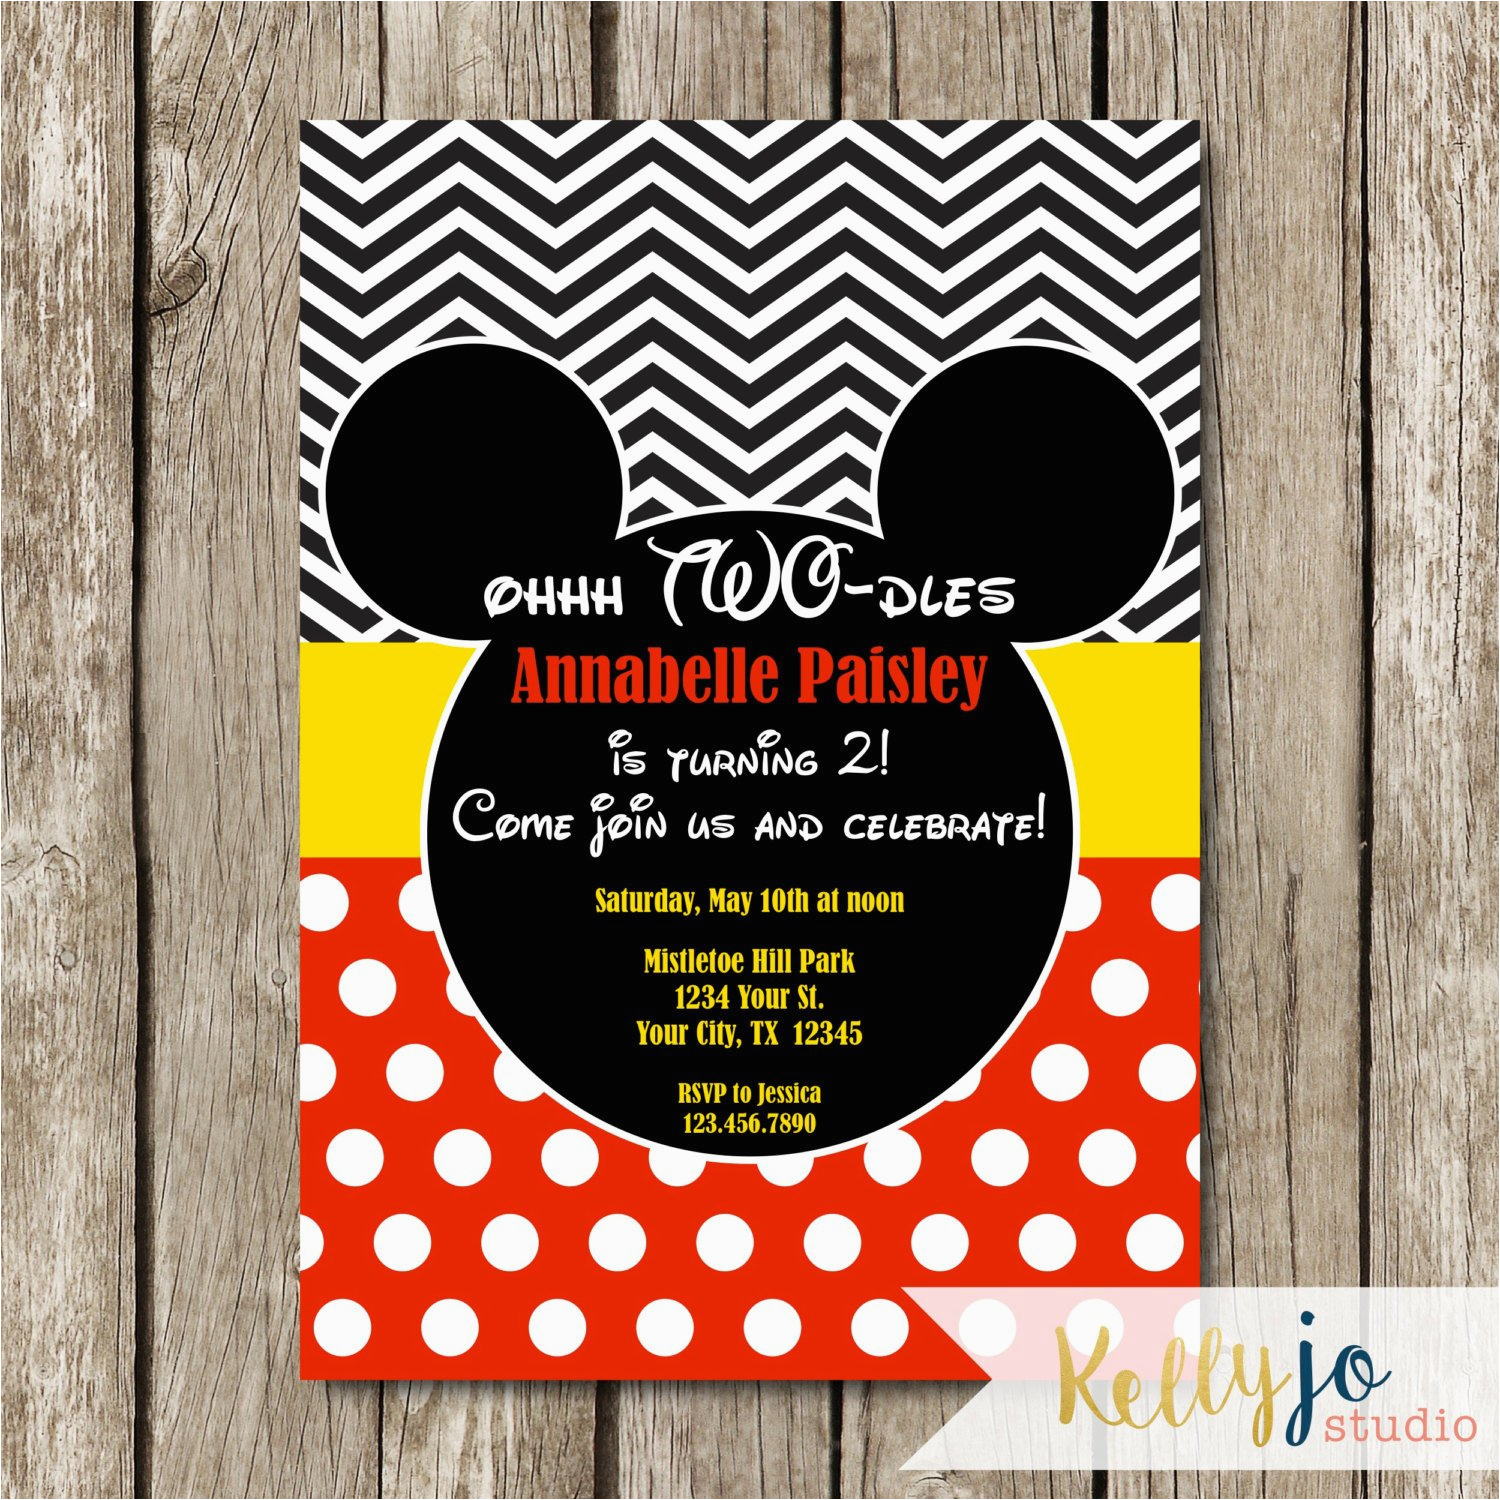 mickey mouse oh two dles birthday invitation mickey mouse